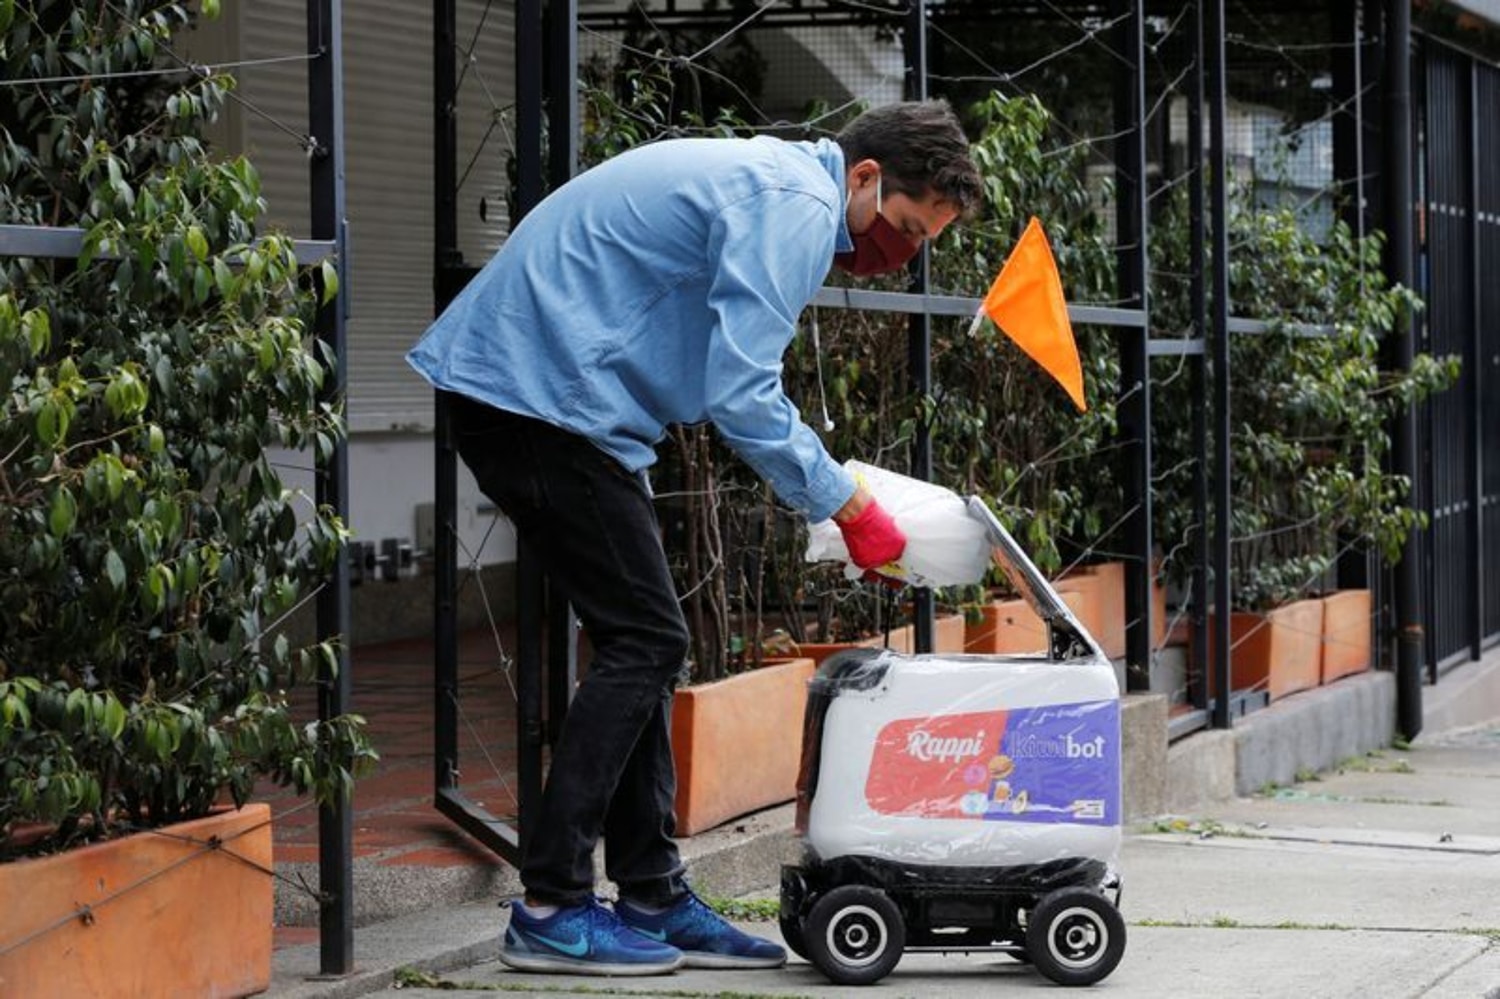 Rappi robots make home deliveries to avoid direct contact between people.